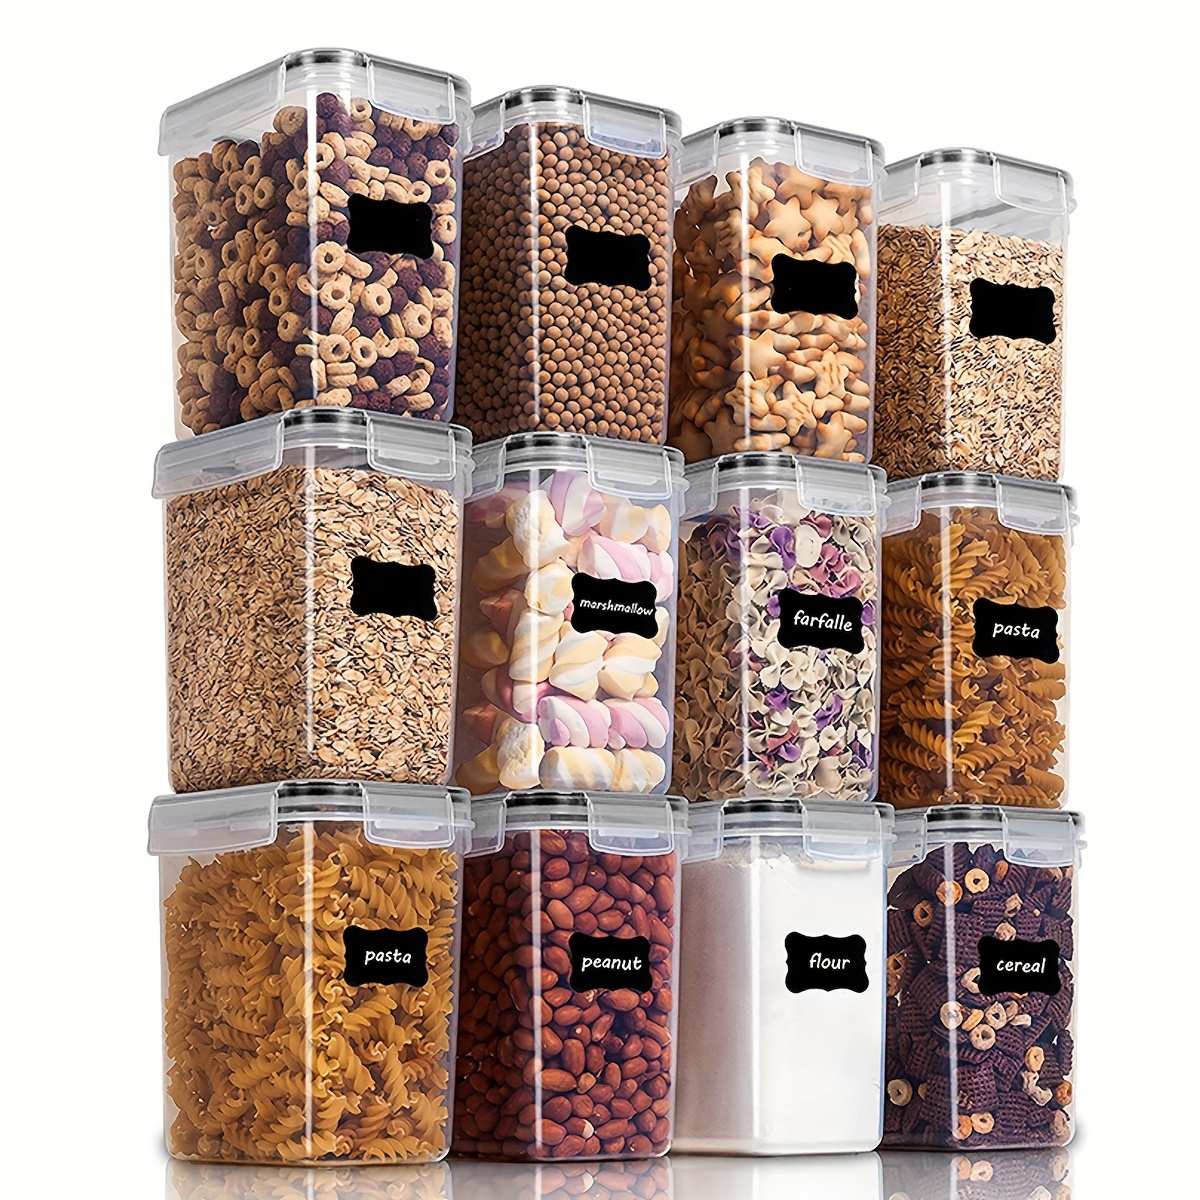 

28pcs Airtight Food Storage Containers Set With Lids, Bpa Free Plastic Dry Food Canisters For Kitchen Pantry Organization And Storage, Include Labels